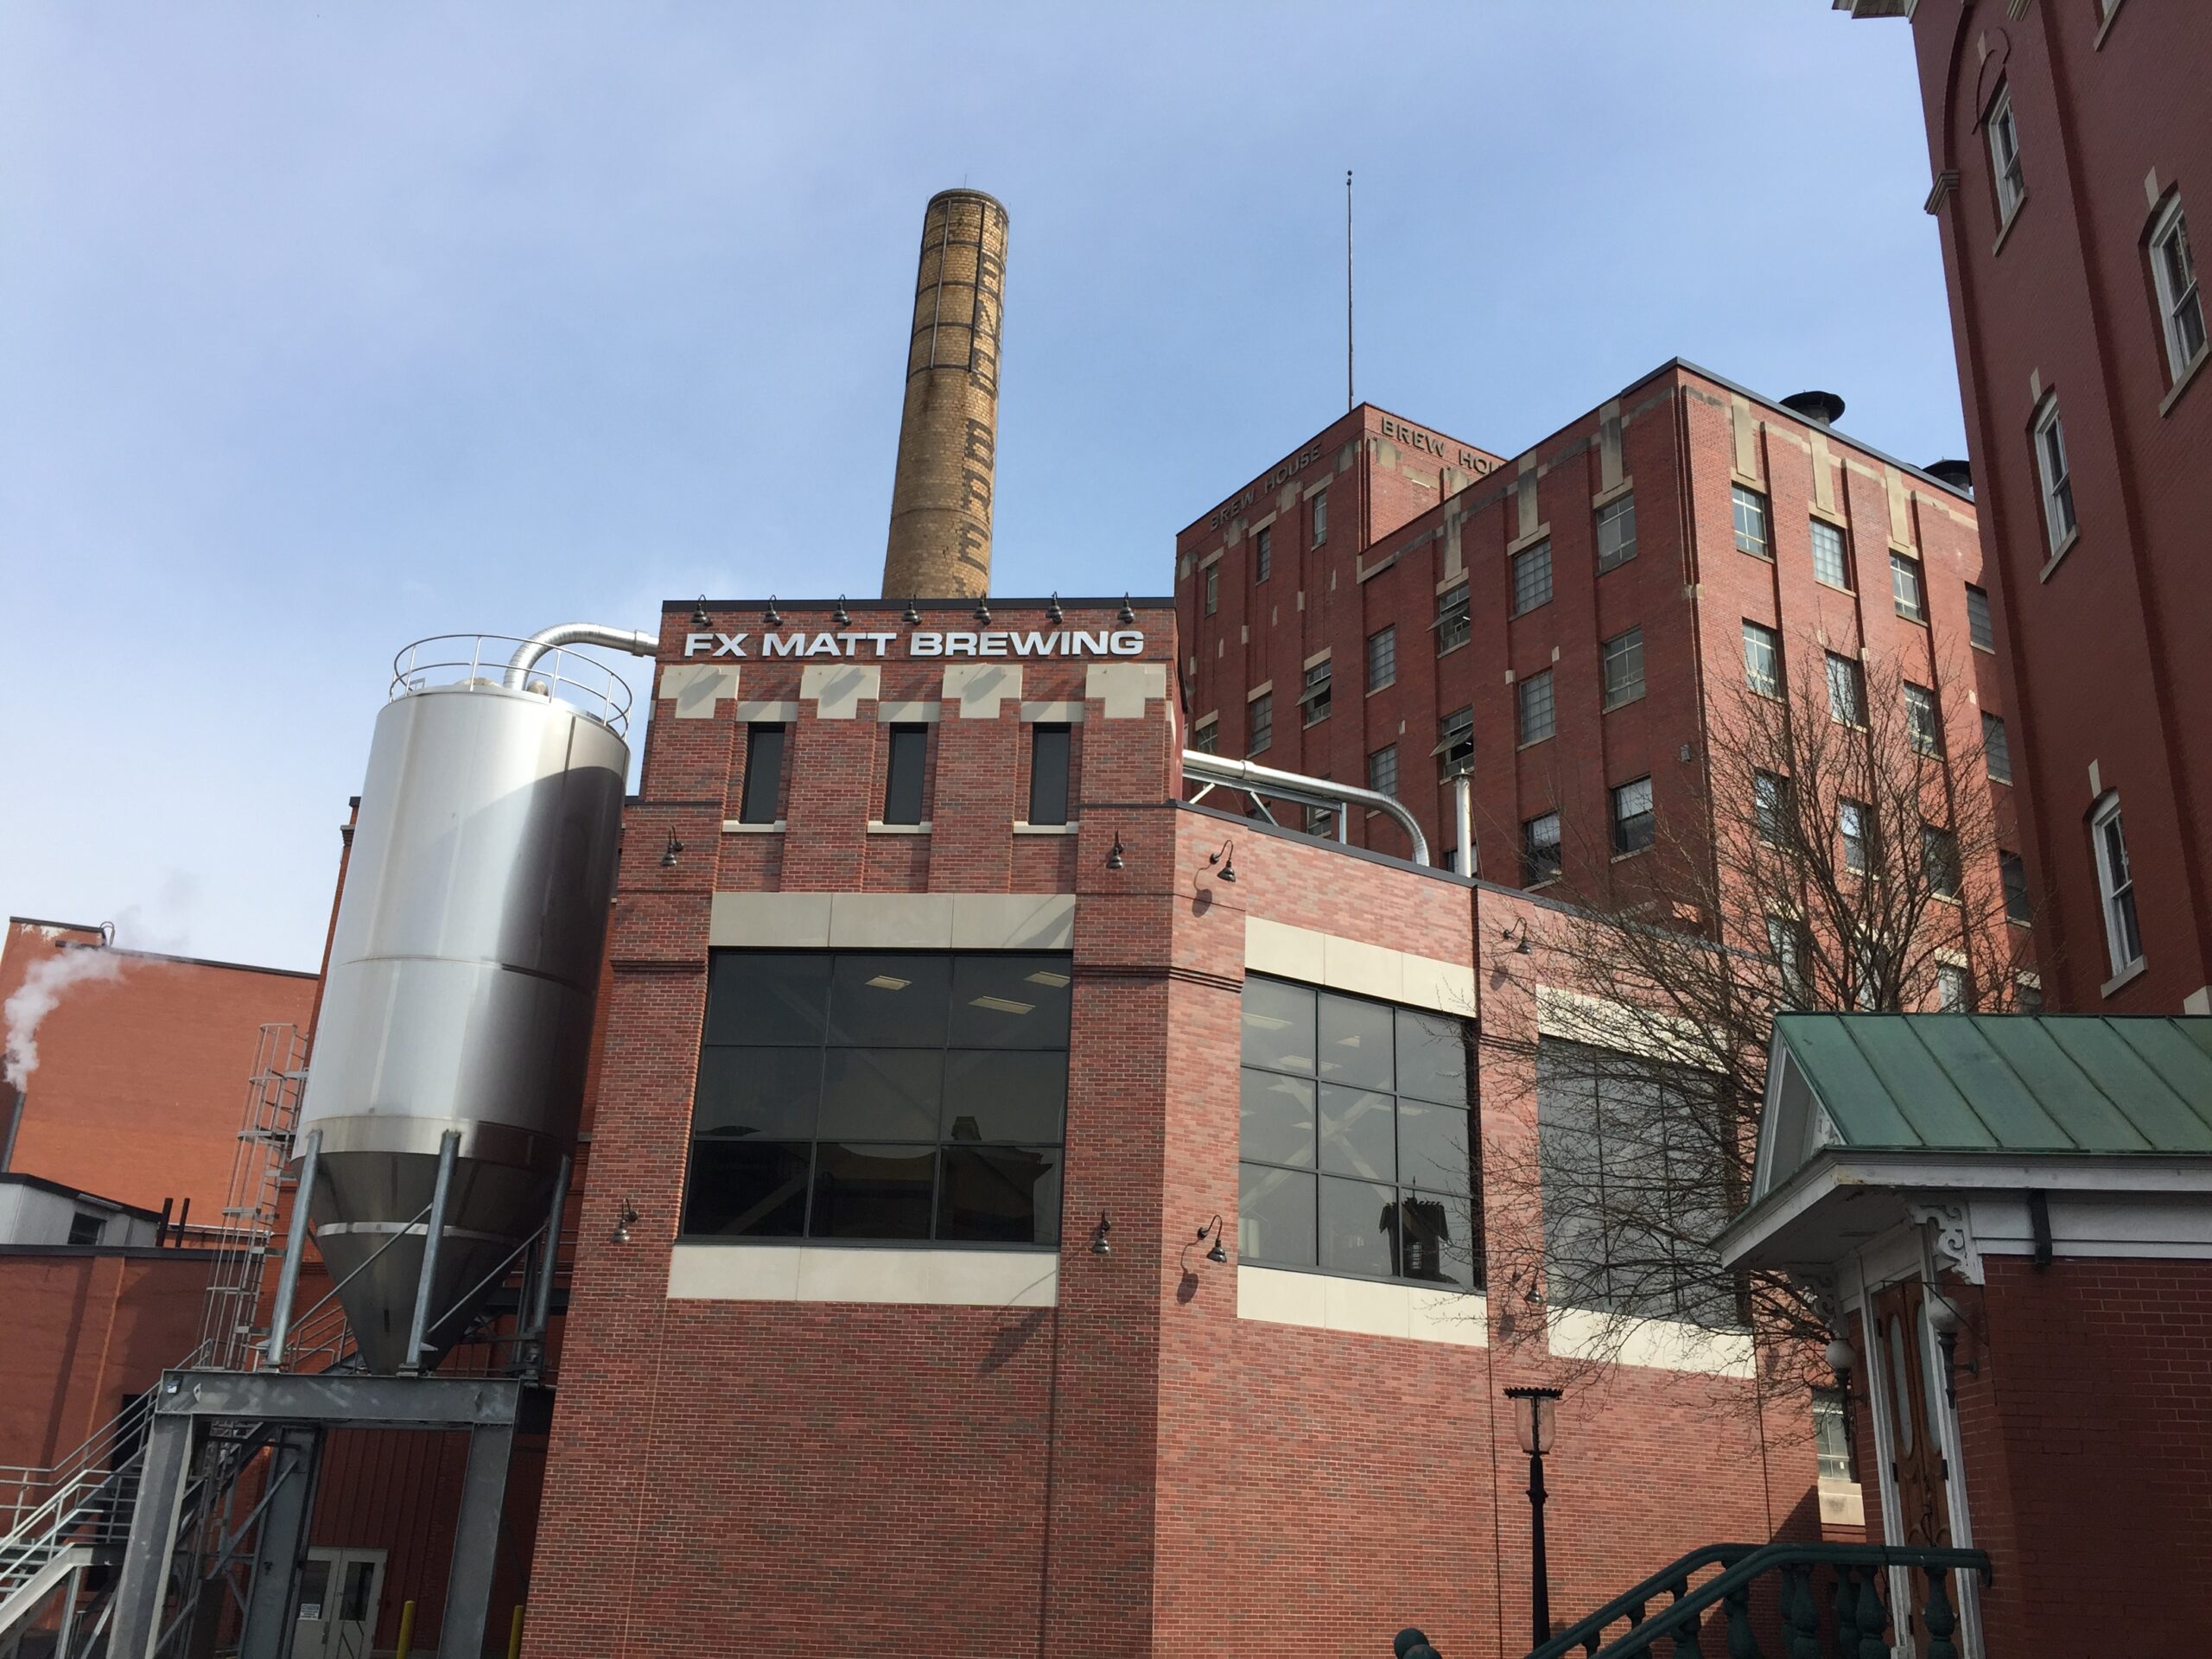 In its newest deal, Utica’s F.X. Matt / Saranac brewery will produce a beer for Guinness